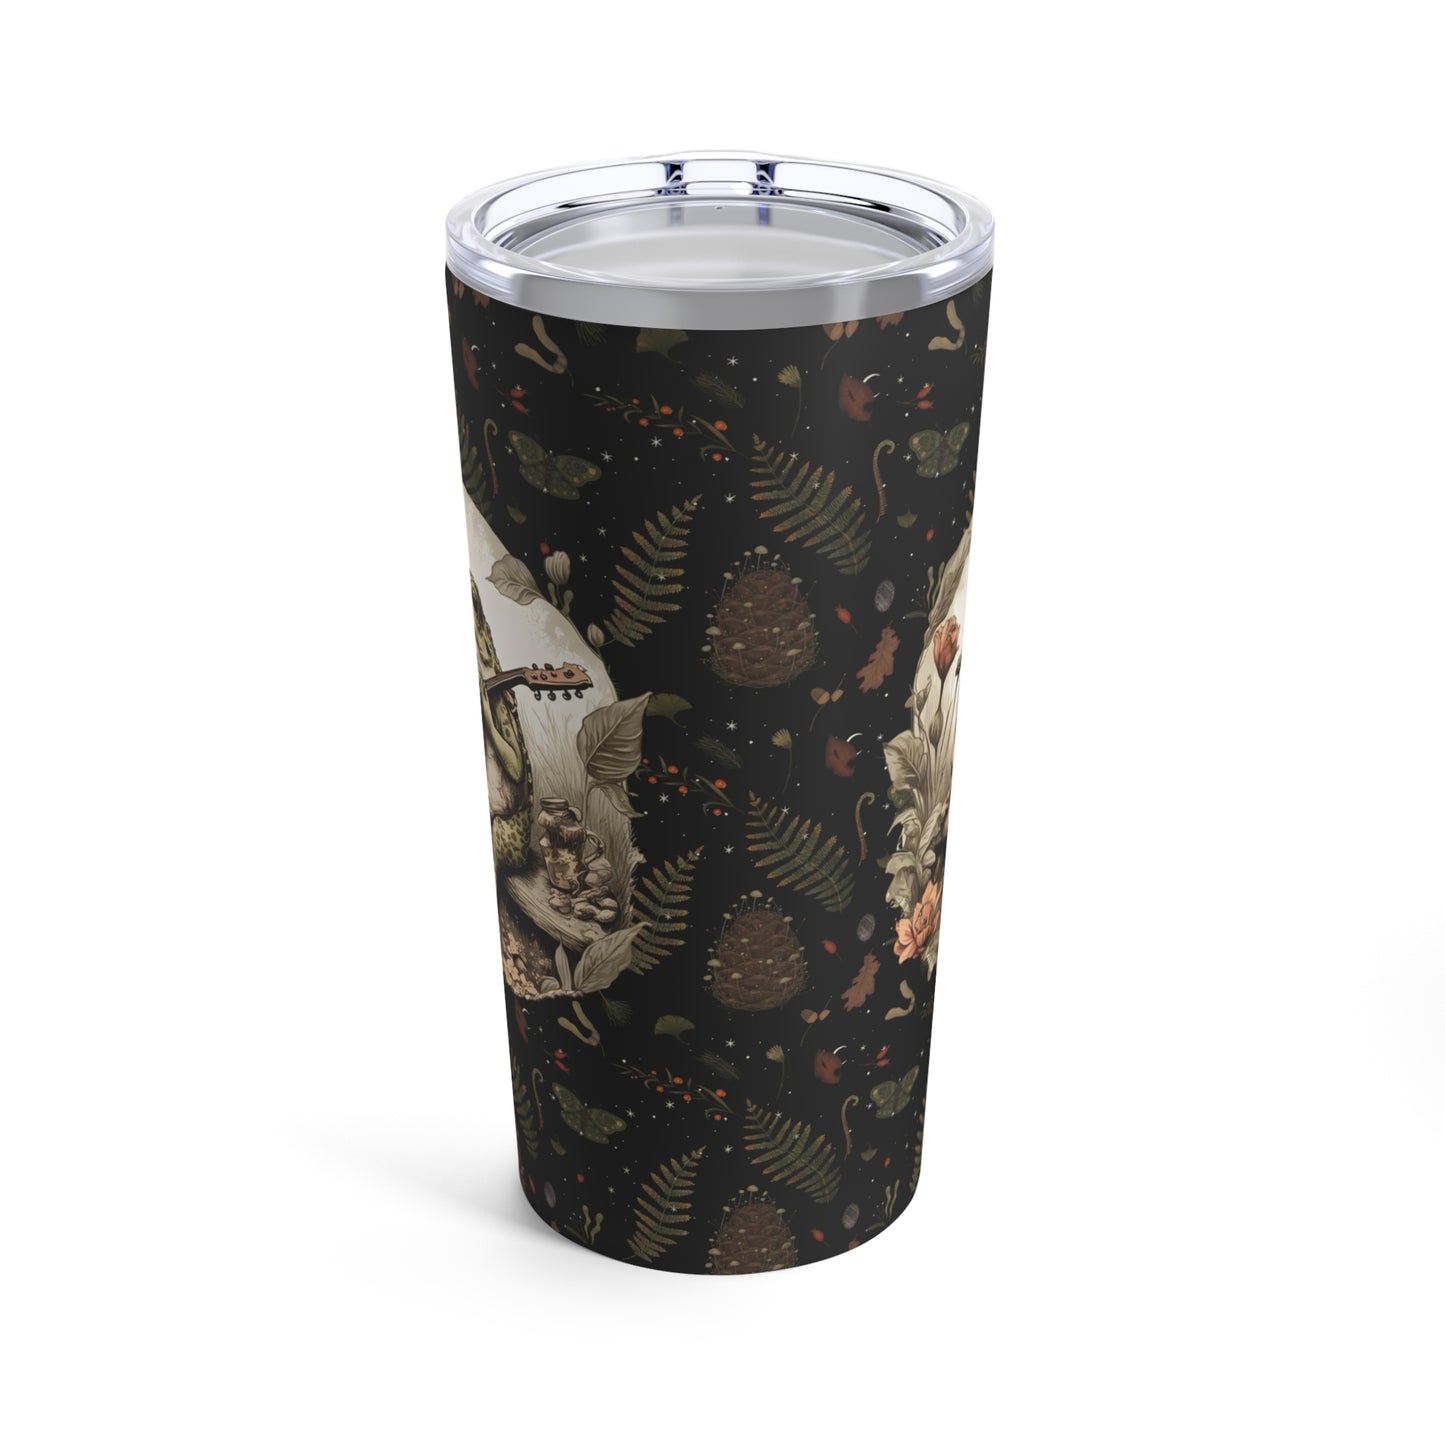 Frog Tumbler 20oz. Cottagecore tumbler for her or him. Toad tumbler for him. Birthday gift ideas